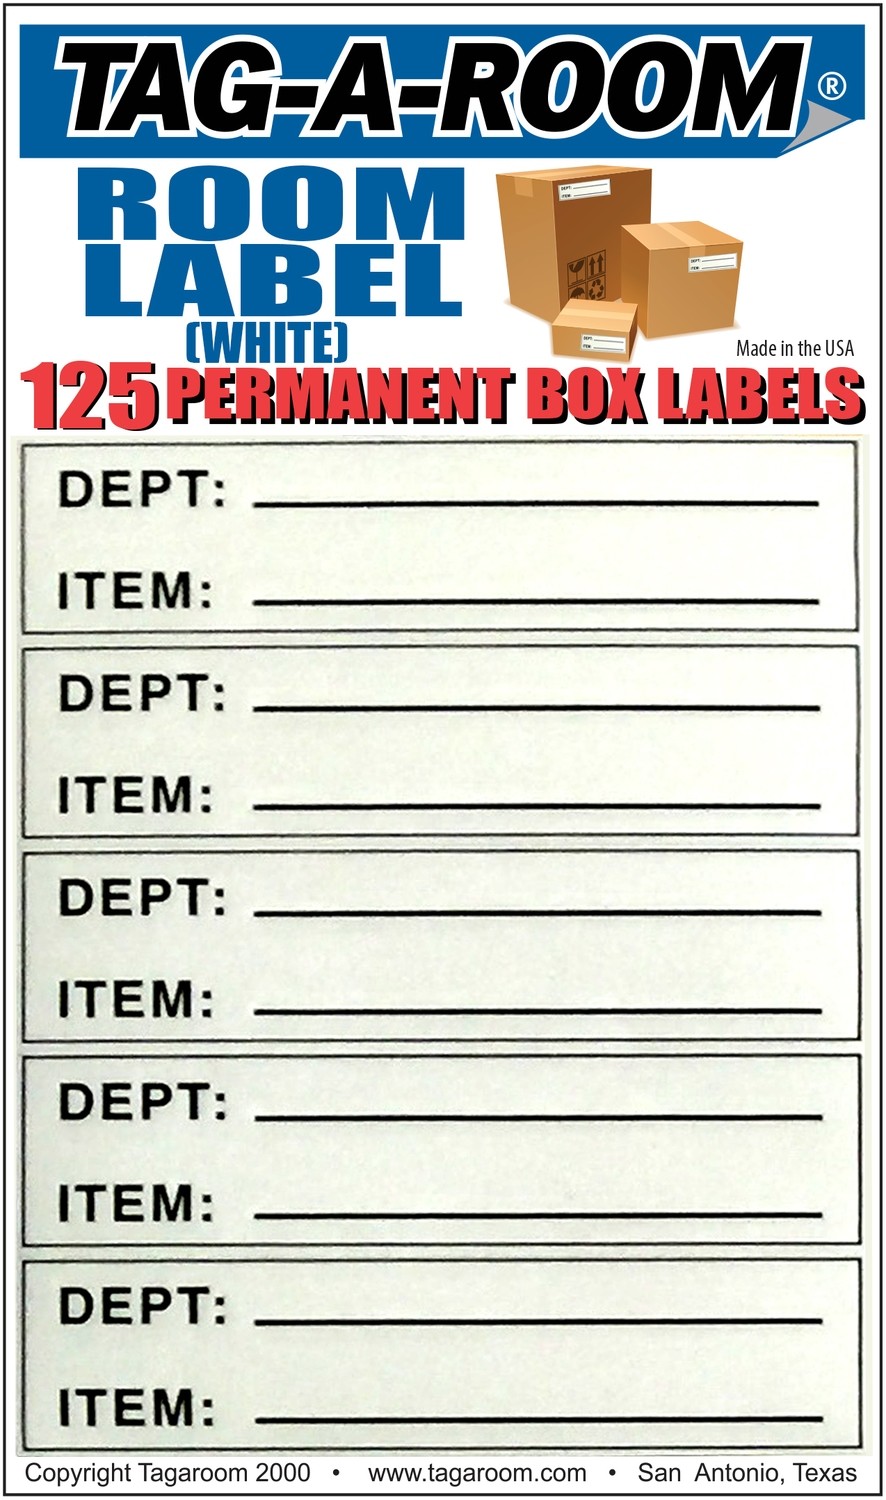 Office - Label - Room - White - 125 Count